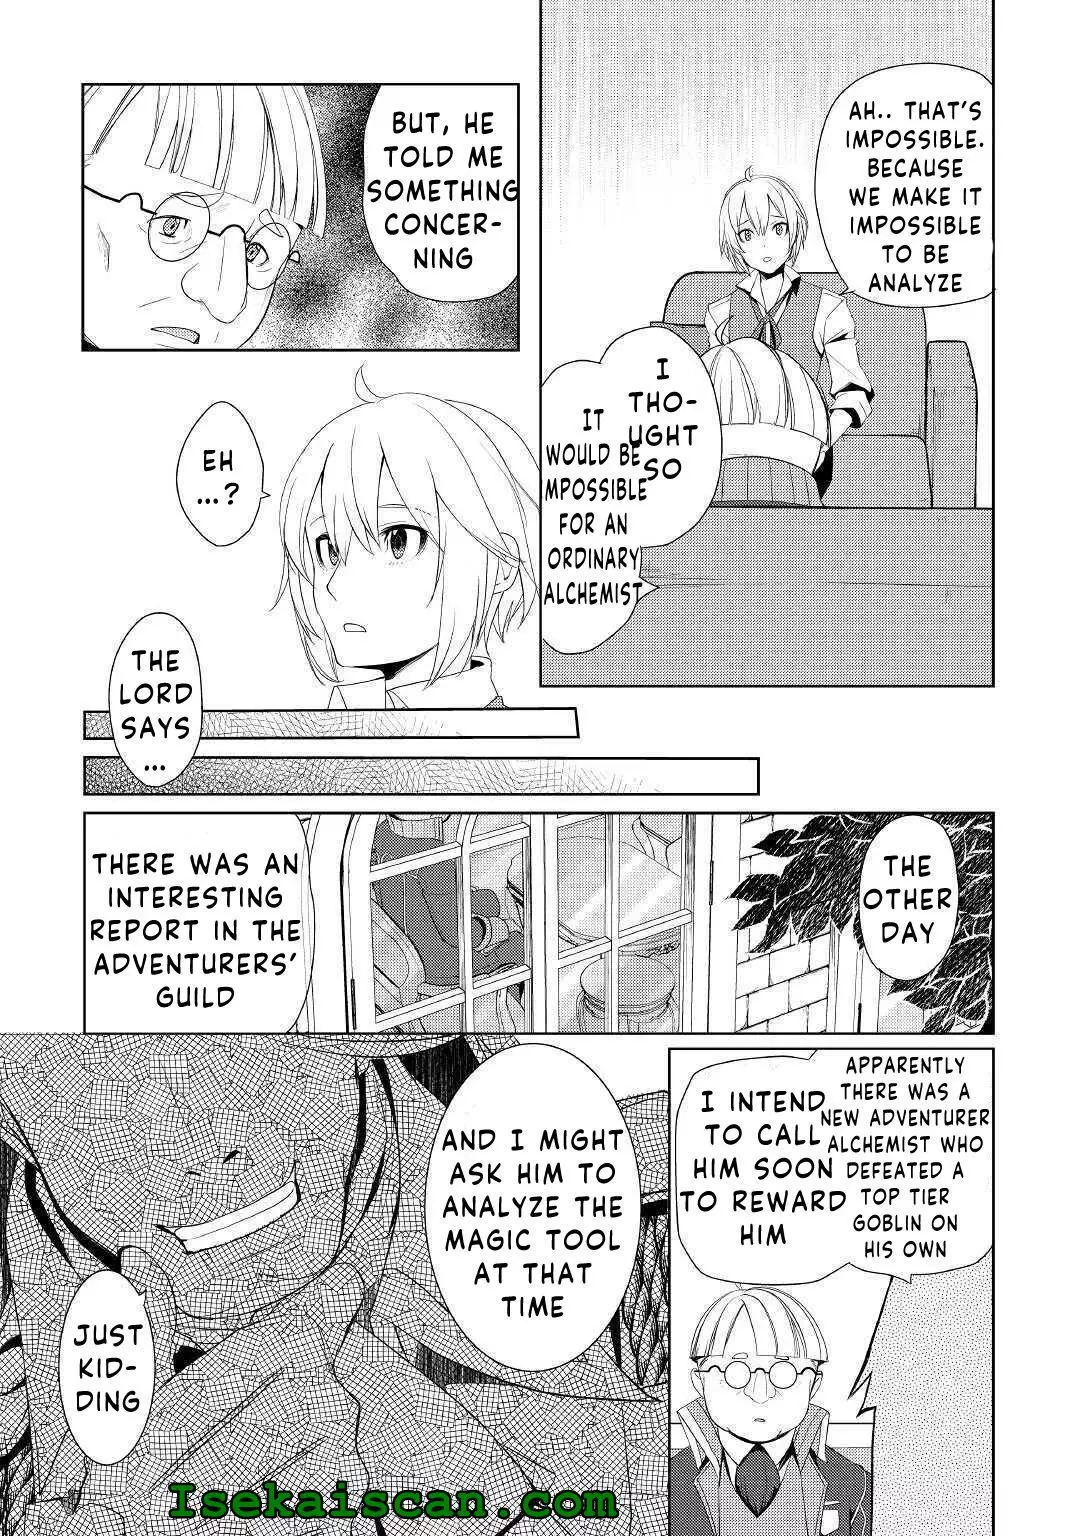 Someday Will I Be The Greatest Alchemist? - 22 page 11-3af16719